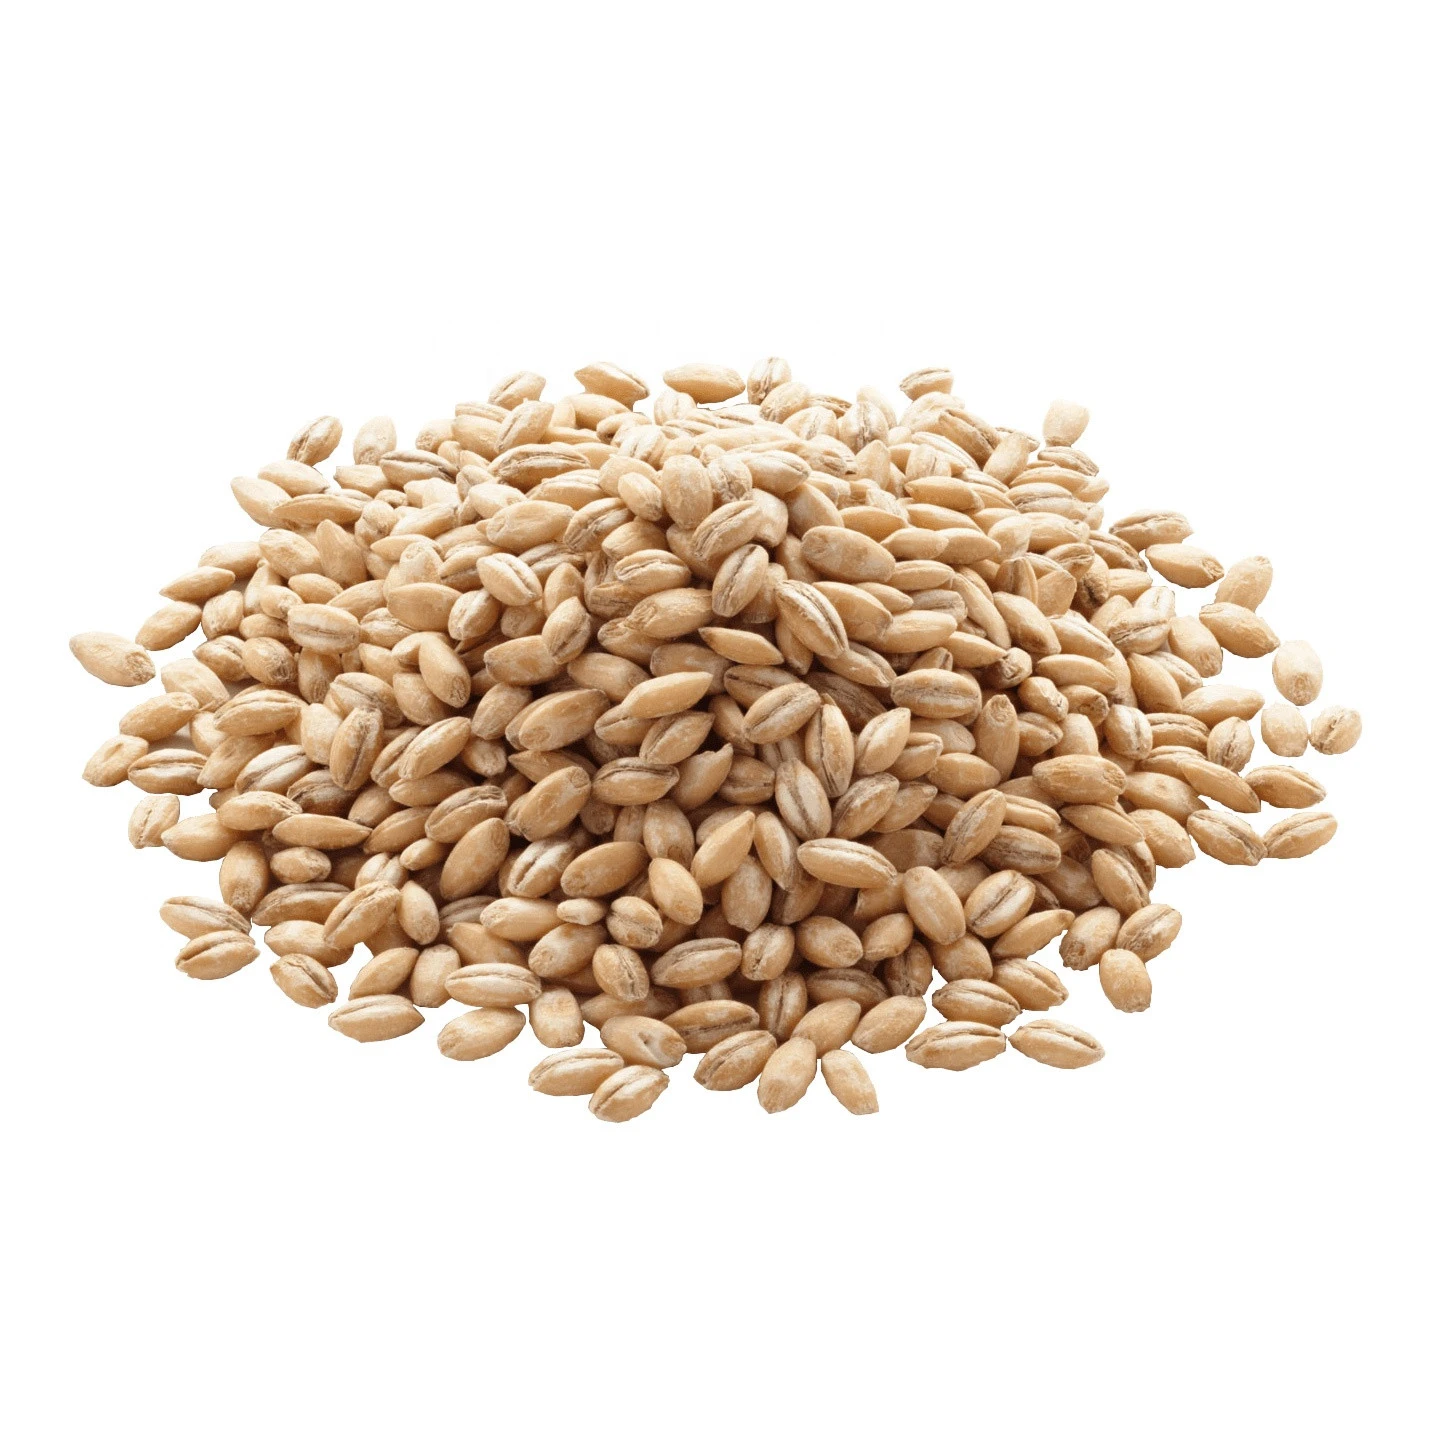 High quality barley grain, agriculture product